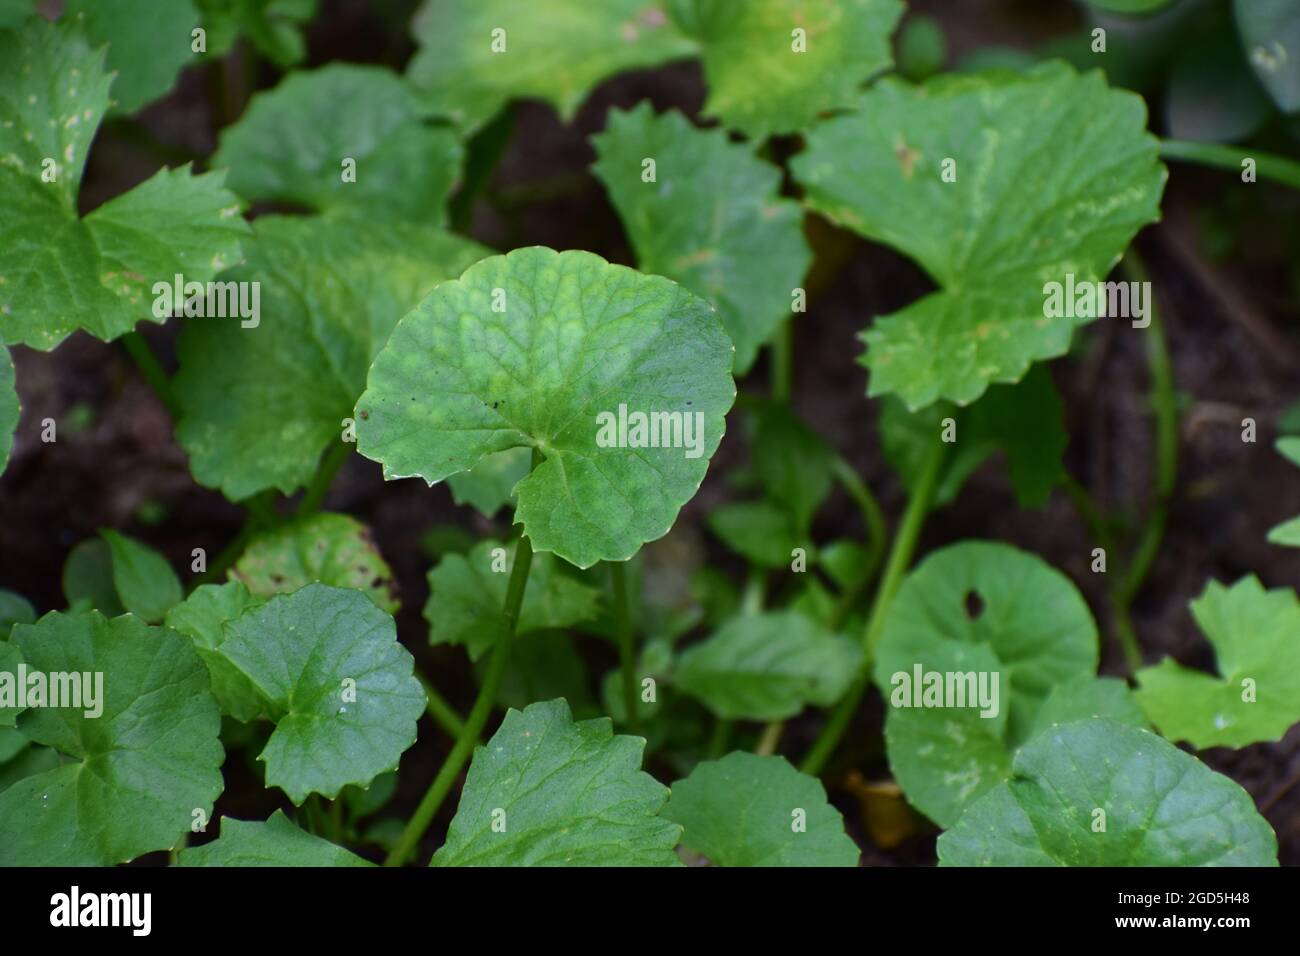 Green Pennywort leaves and plants on the agriculture land, Pennywort cultivation on wet farm land, Centella asiatica leaves Stock Photo